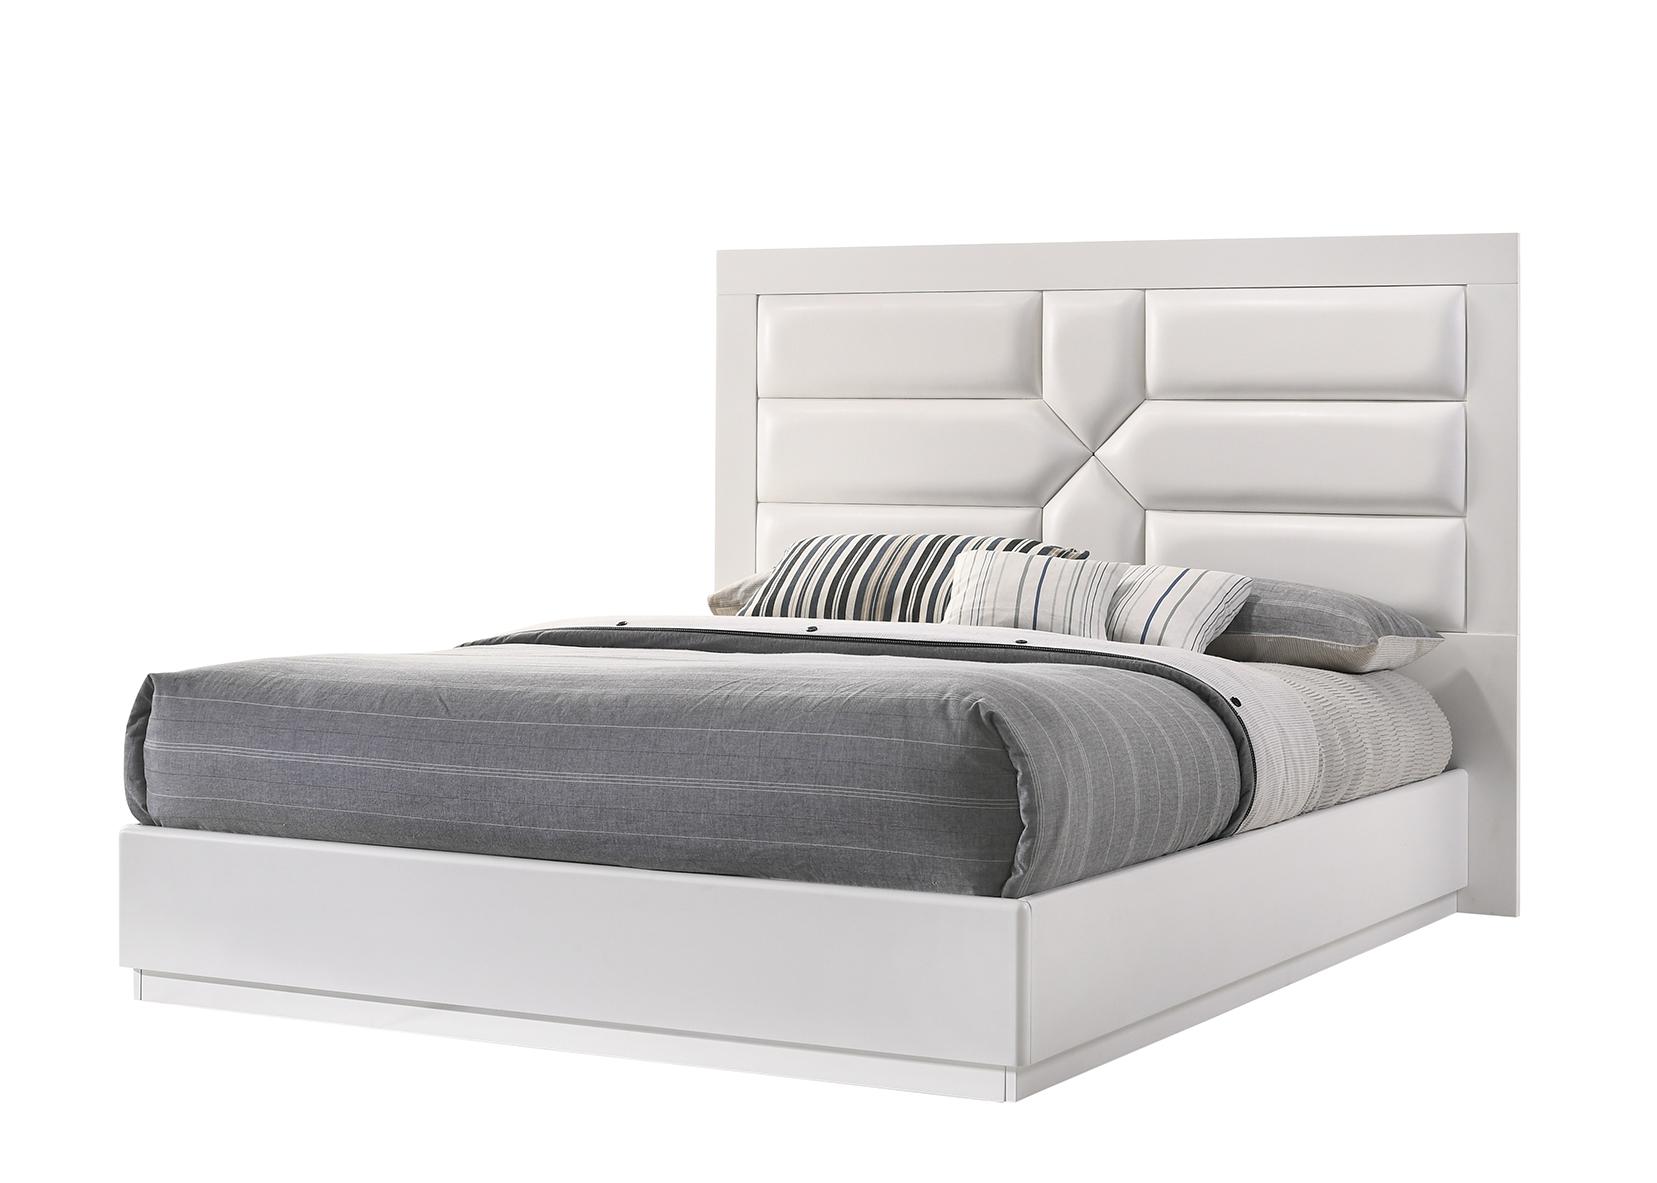 Contemporary Platform Bed Amsterdam AMSTERDAM-BED-KG in White Leatherette